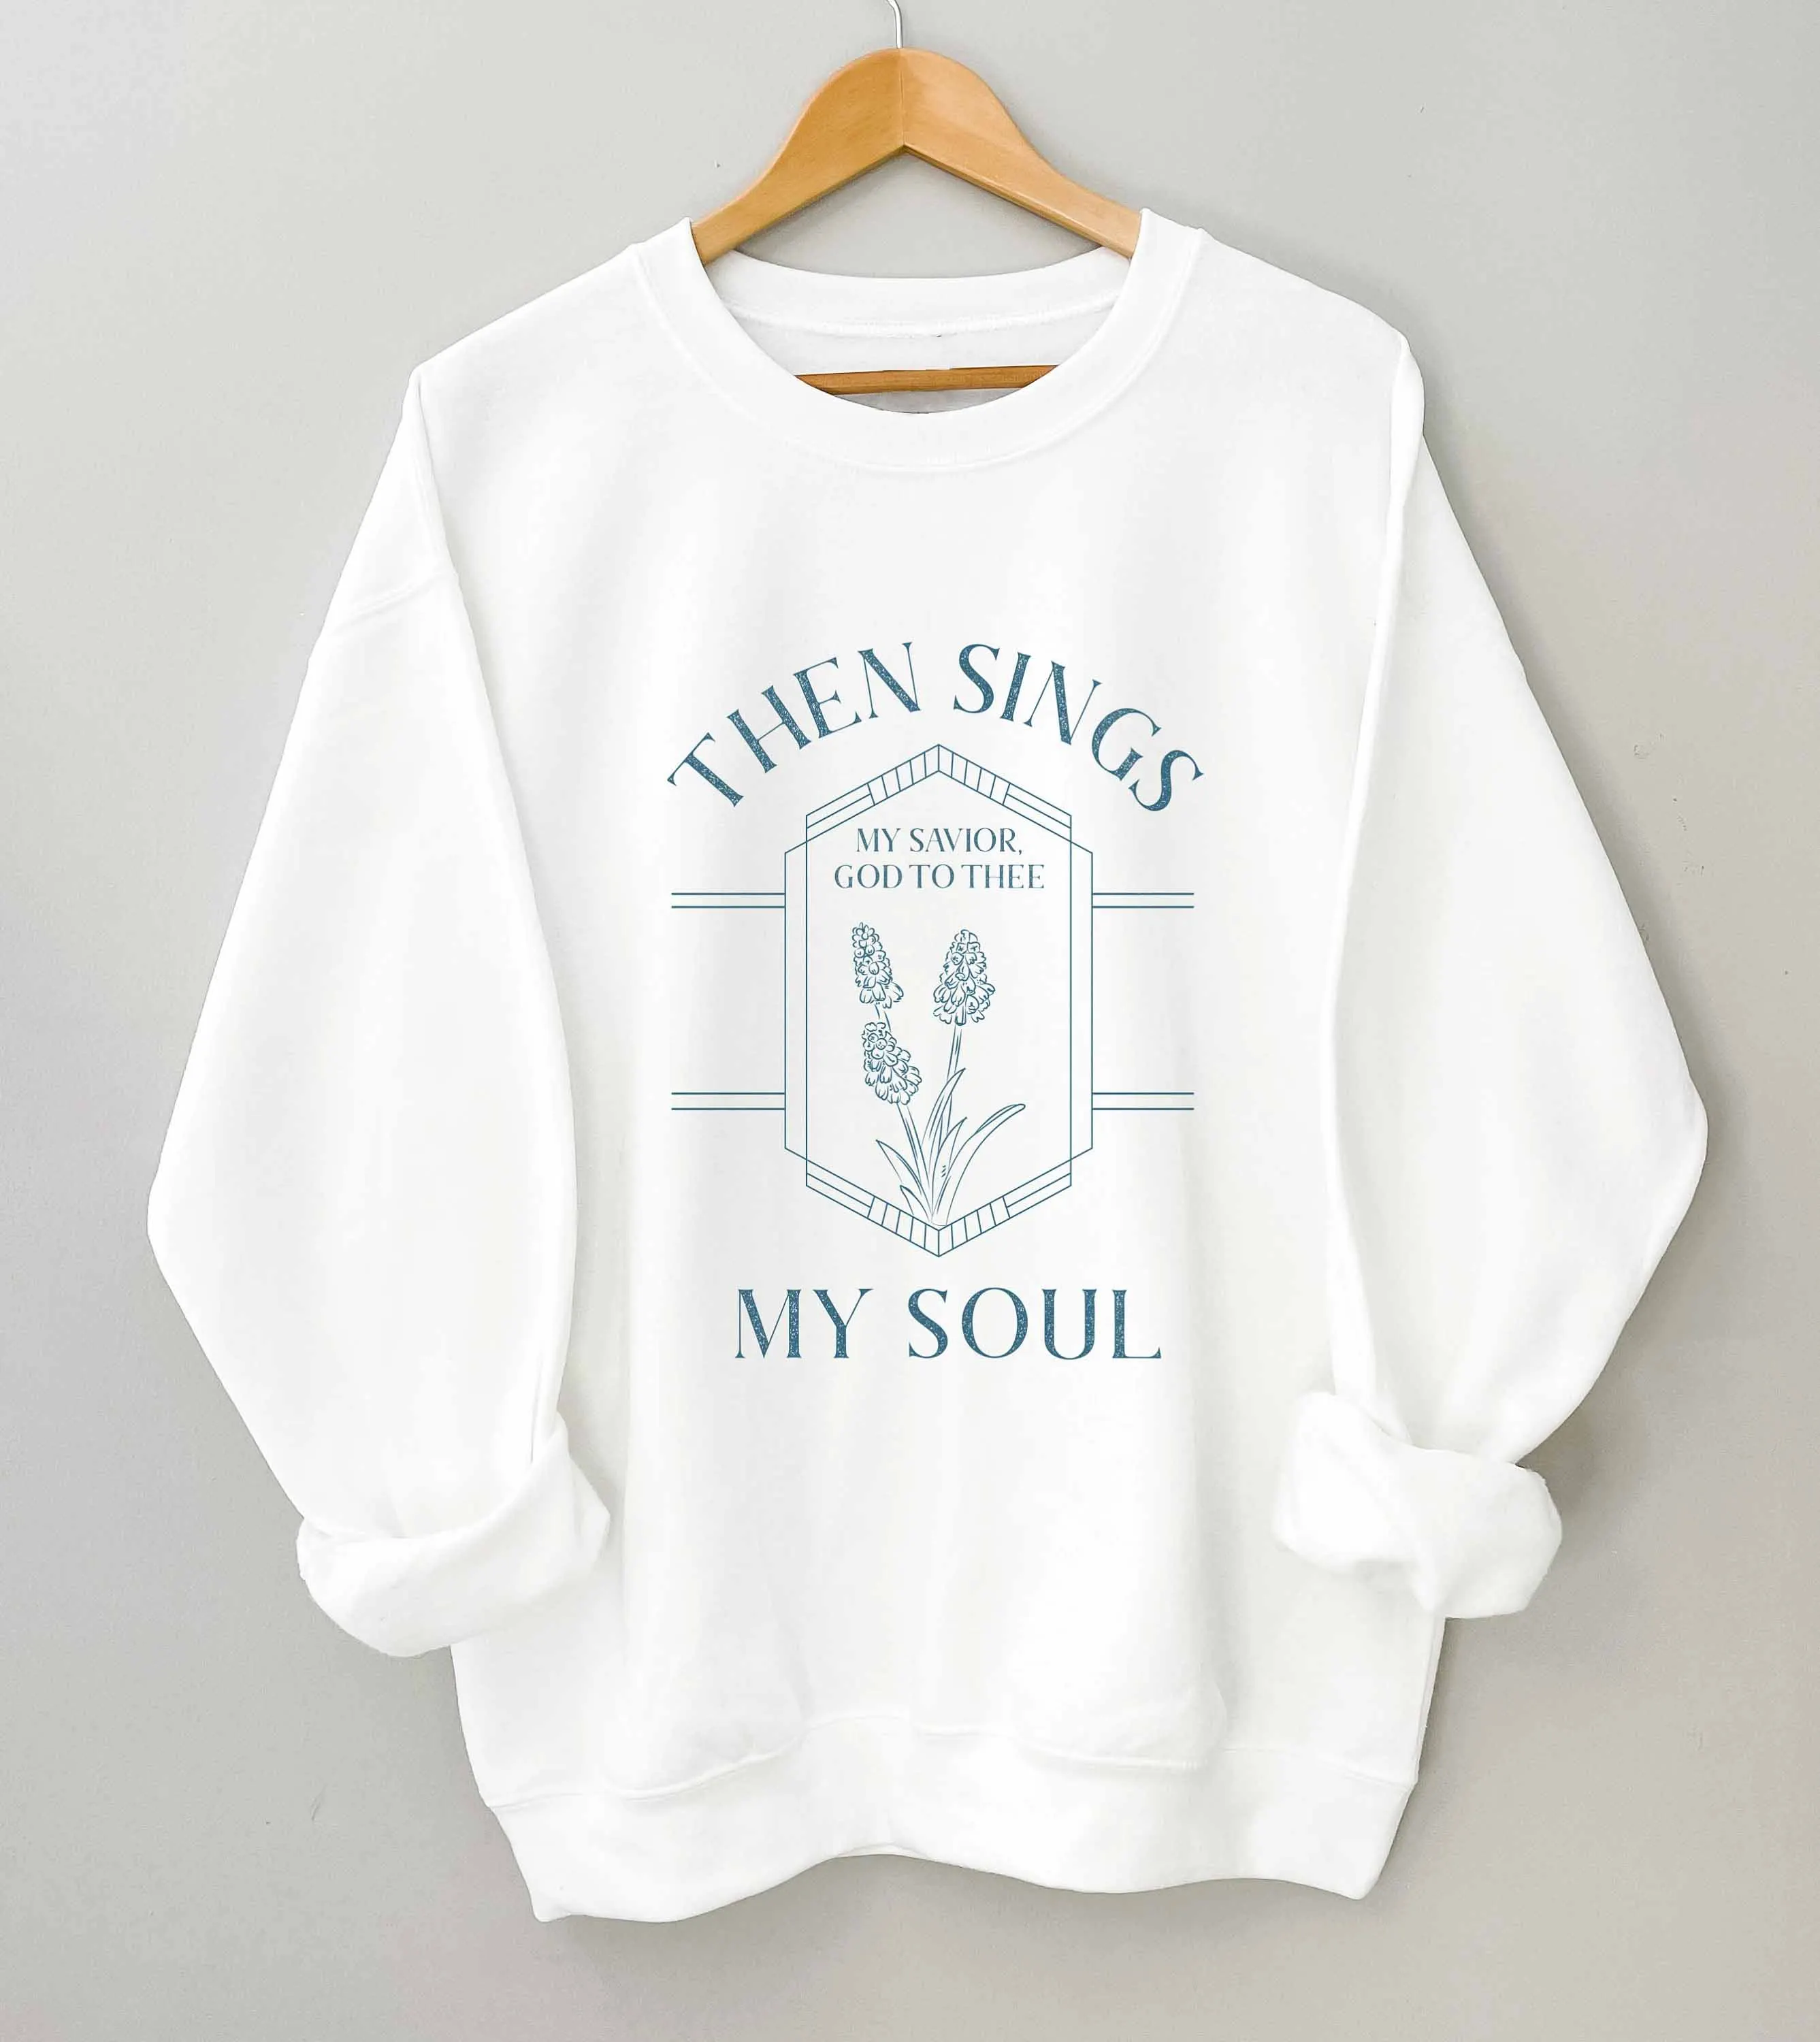 

Then Sings My Soul Christian Sweatshirt Bible Verse graphic religion church quote cotton autumn spring vintage pullovers tops